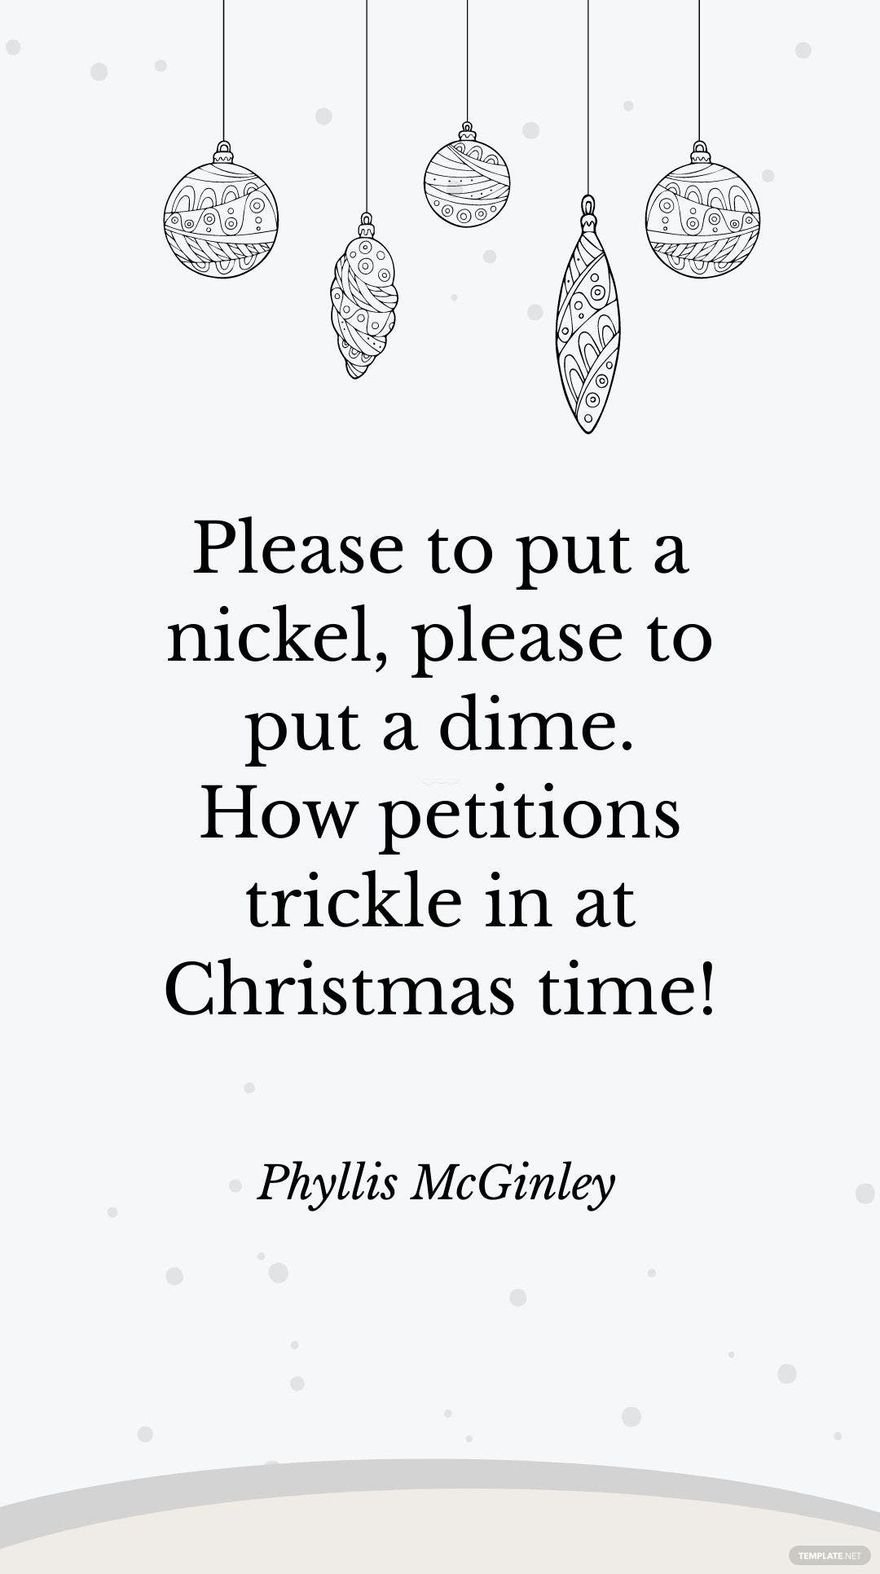 Phyllis McGinley - Please to put a nickel, please to put a dime. How petitions trickle in at Christmas time!